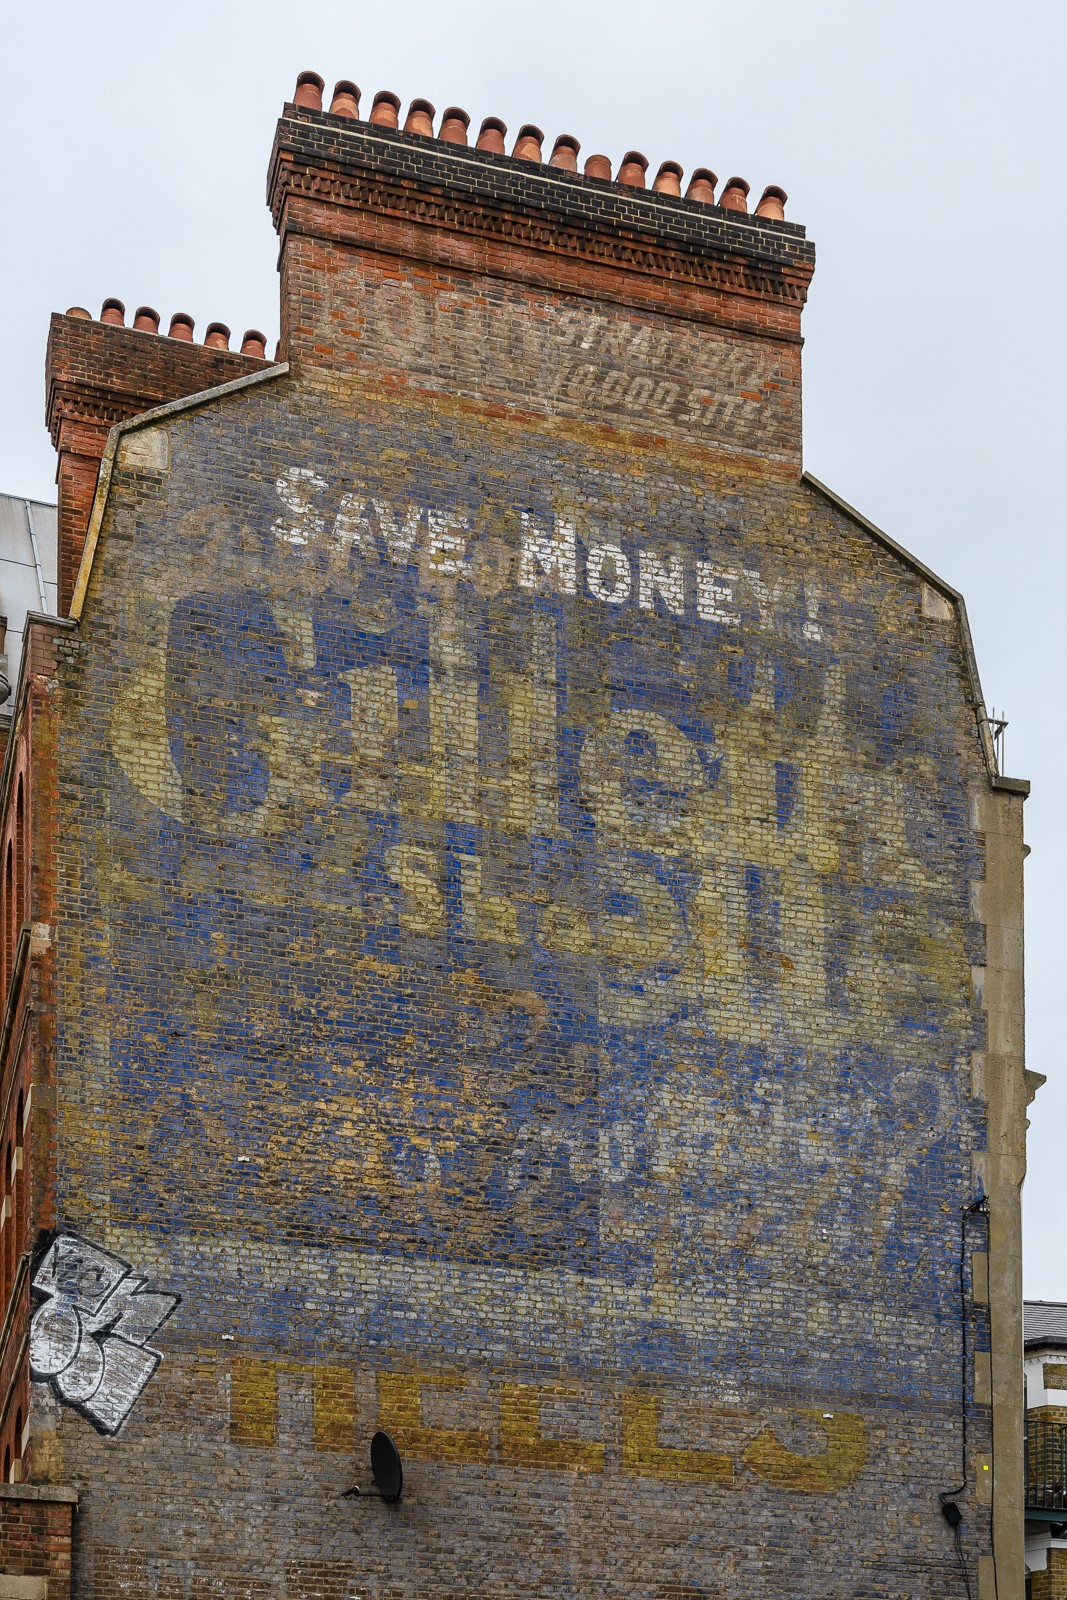 Multiple layers of fading painted advertising on a wall.